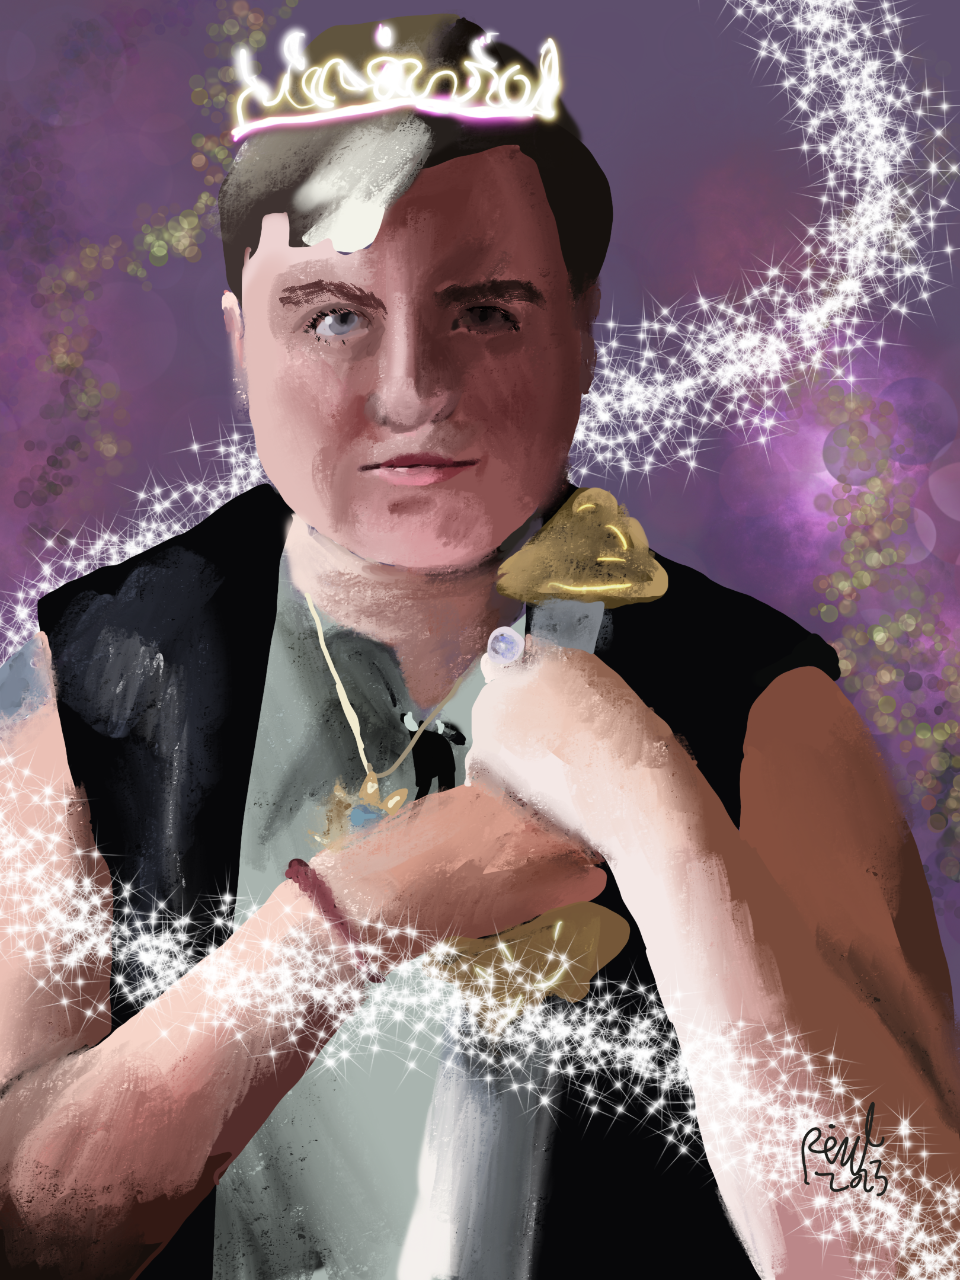 A colorful painting with a purple and gold background shows a young person with short, brown hair wearing a black sleeveless vest and white shirt. He has a glowing tiara on his head and holds a scepter. A trail of white sparkles wraps around him.